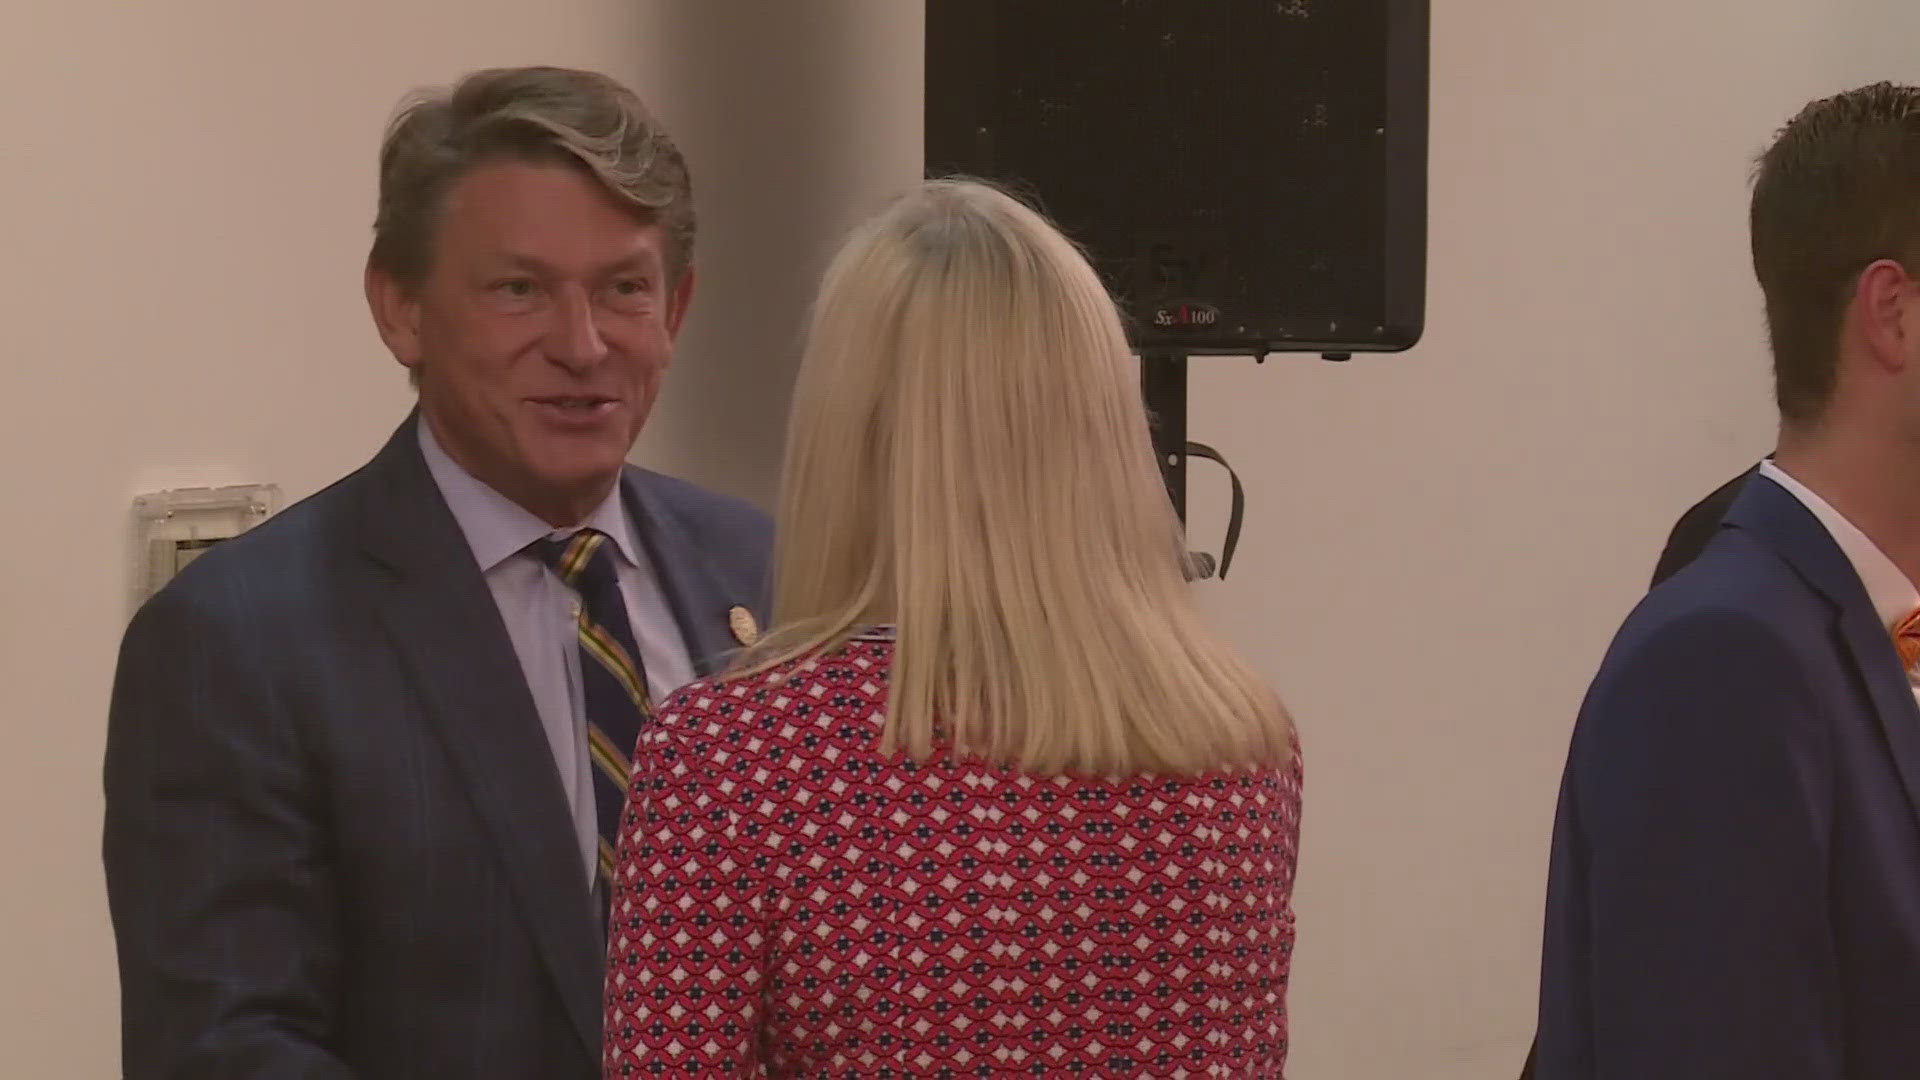 The board will discuss the next term for UT System President Randy Boyd.